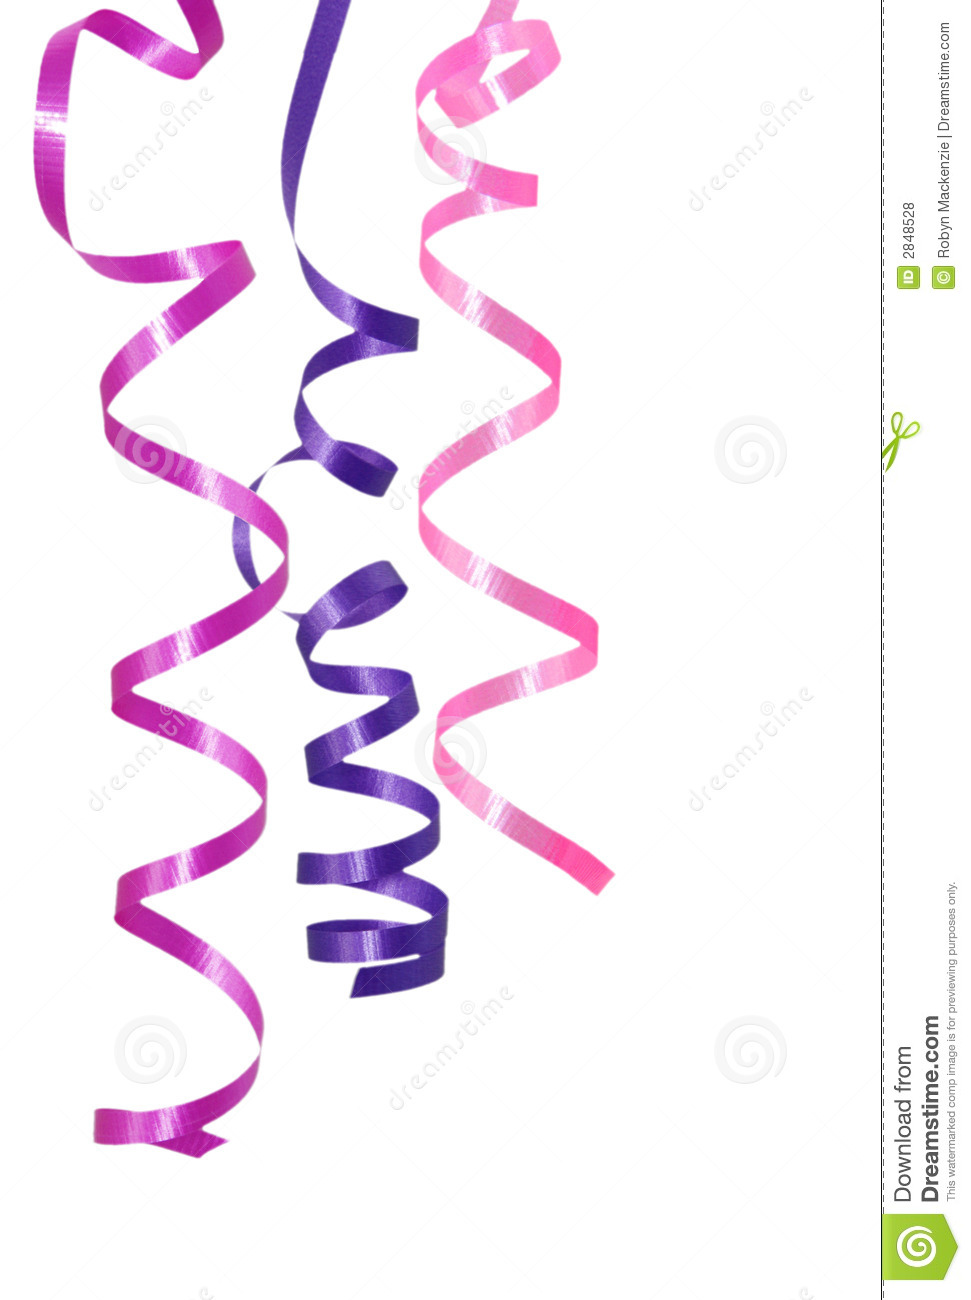 Curly Ribbons Against A Clean White Background 